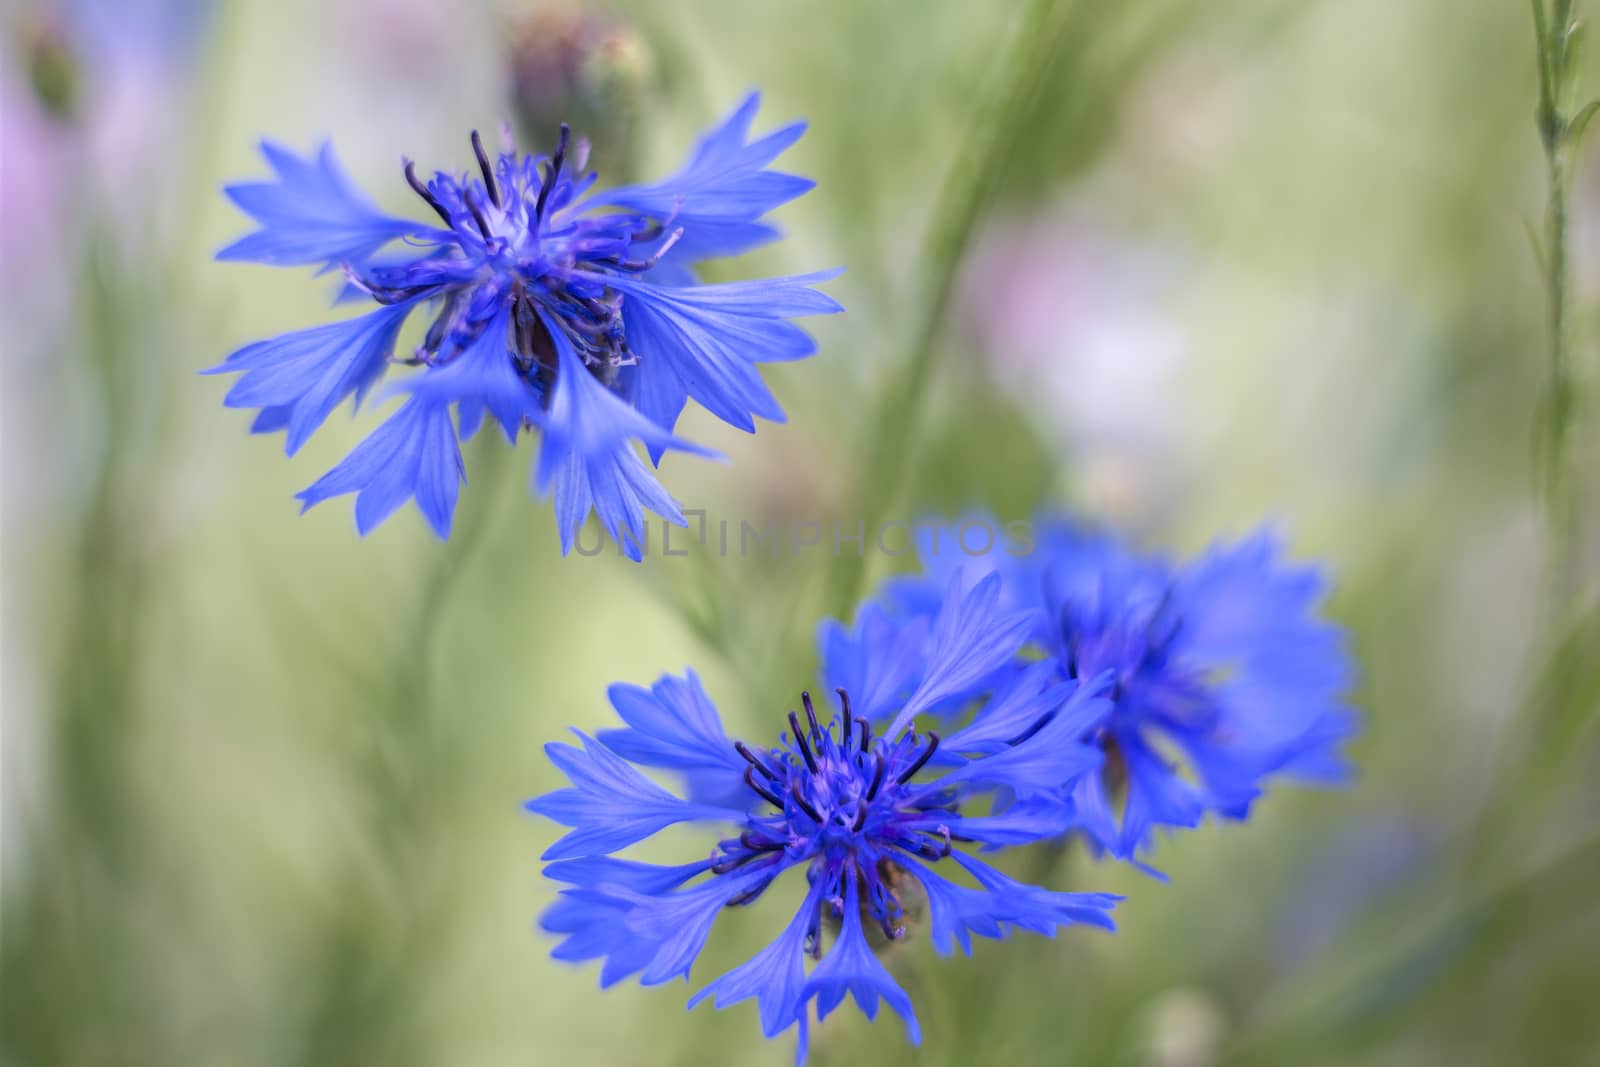 blue cornflowers at a shallow depth of field
